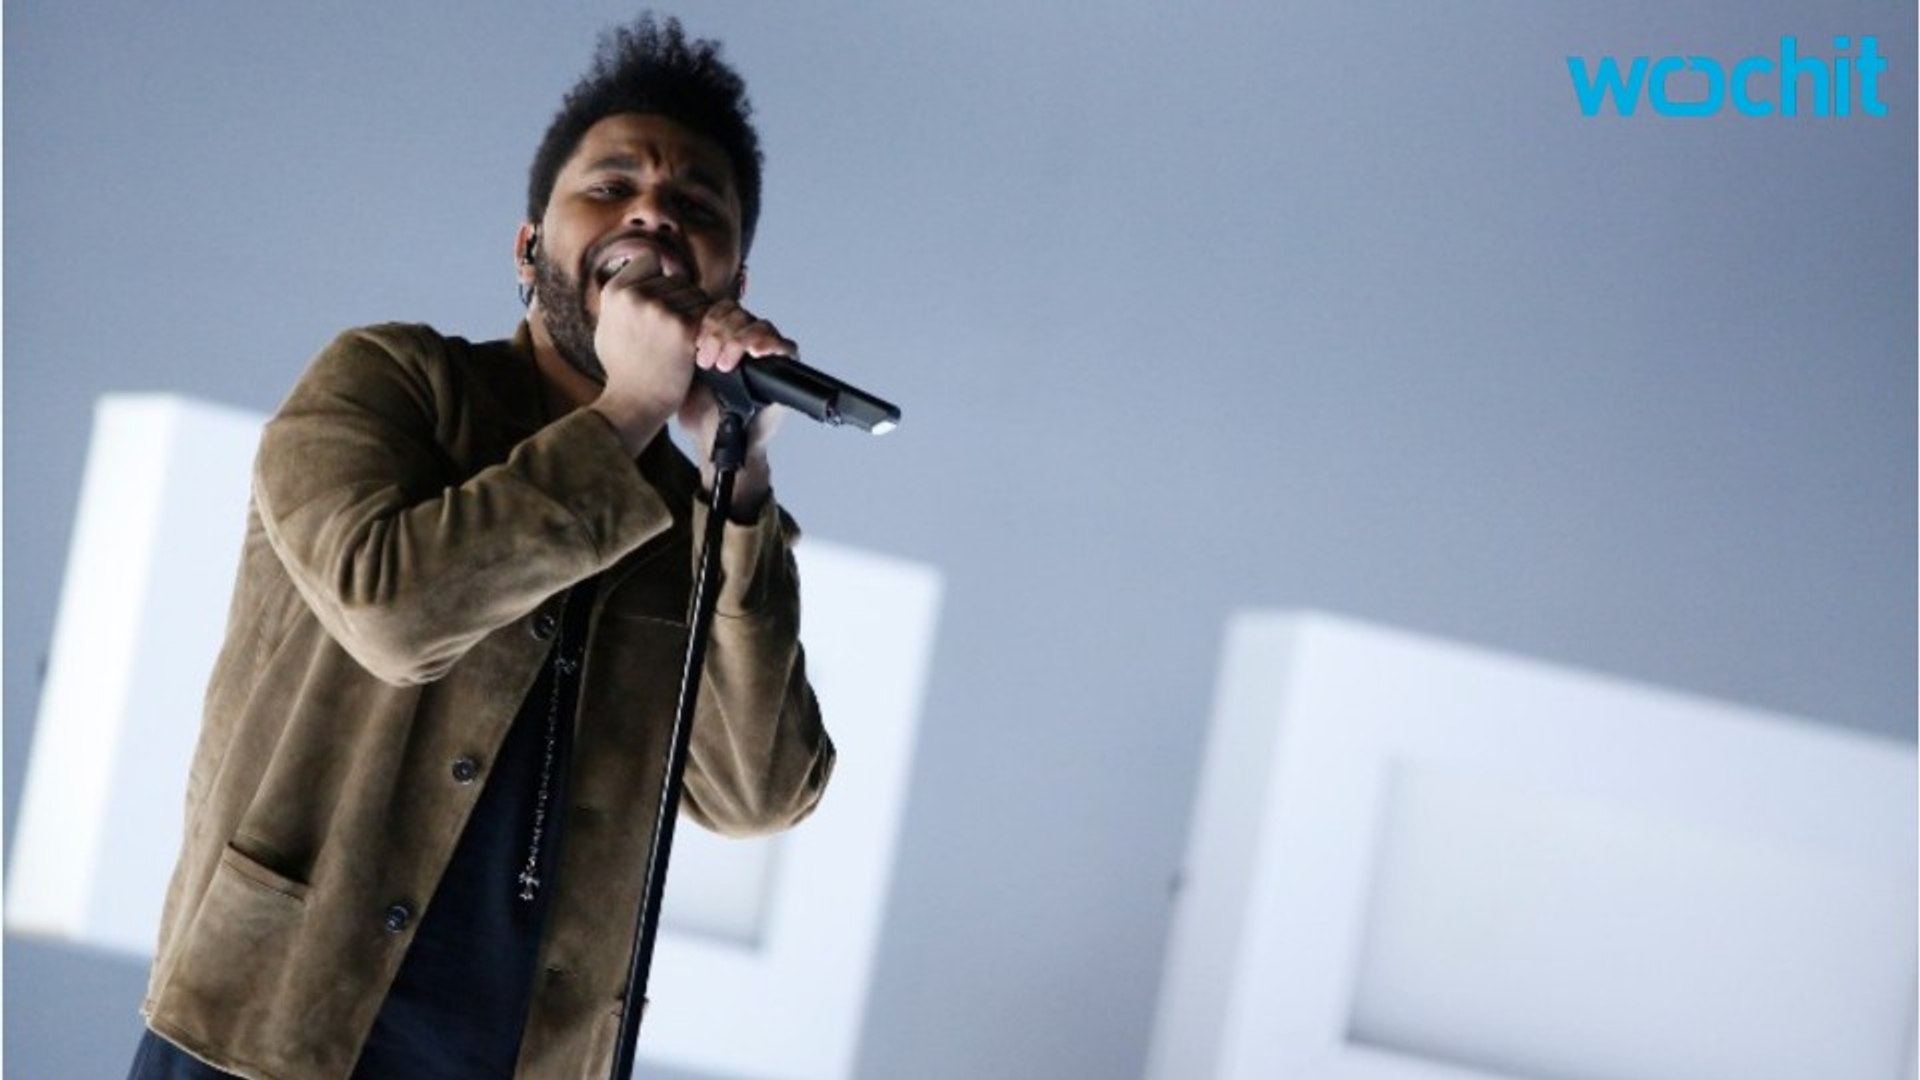 The Weeknd Holds Off The XX On Billboard Top 200